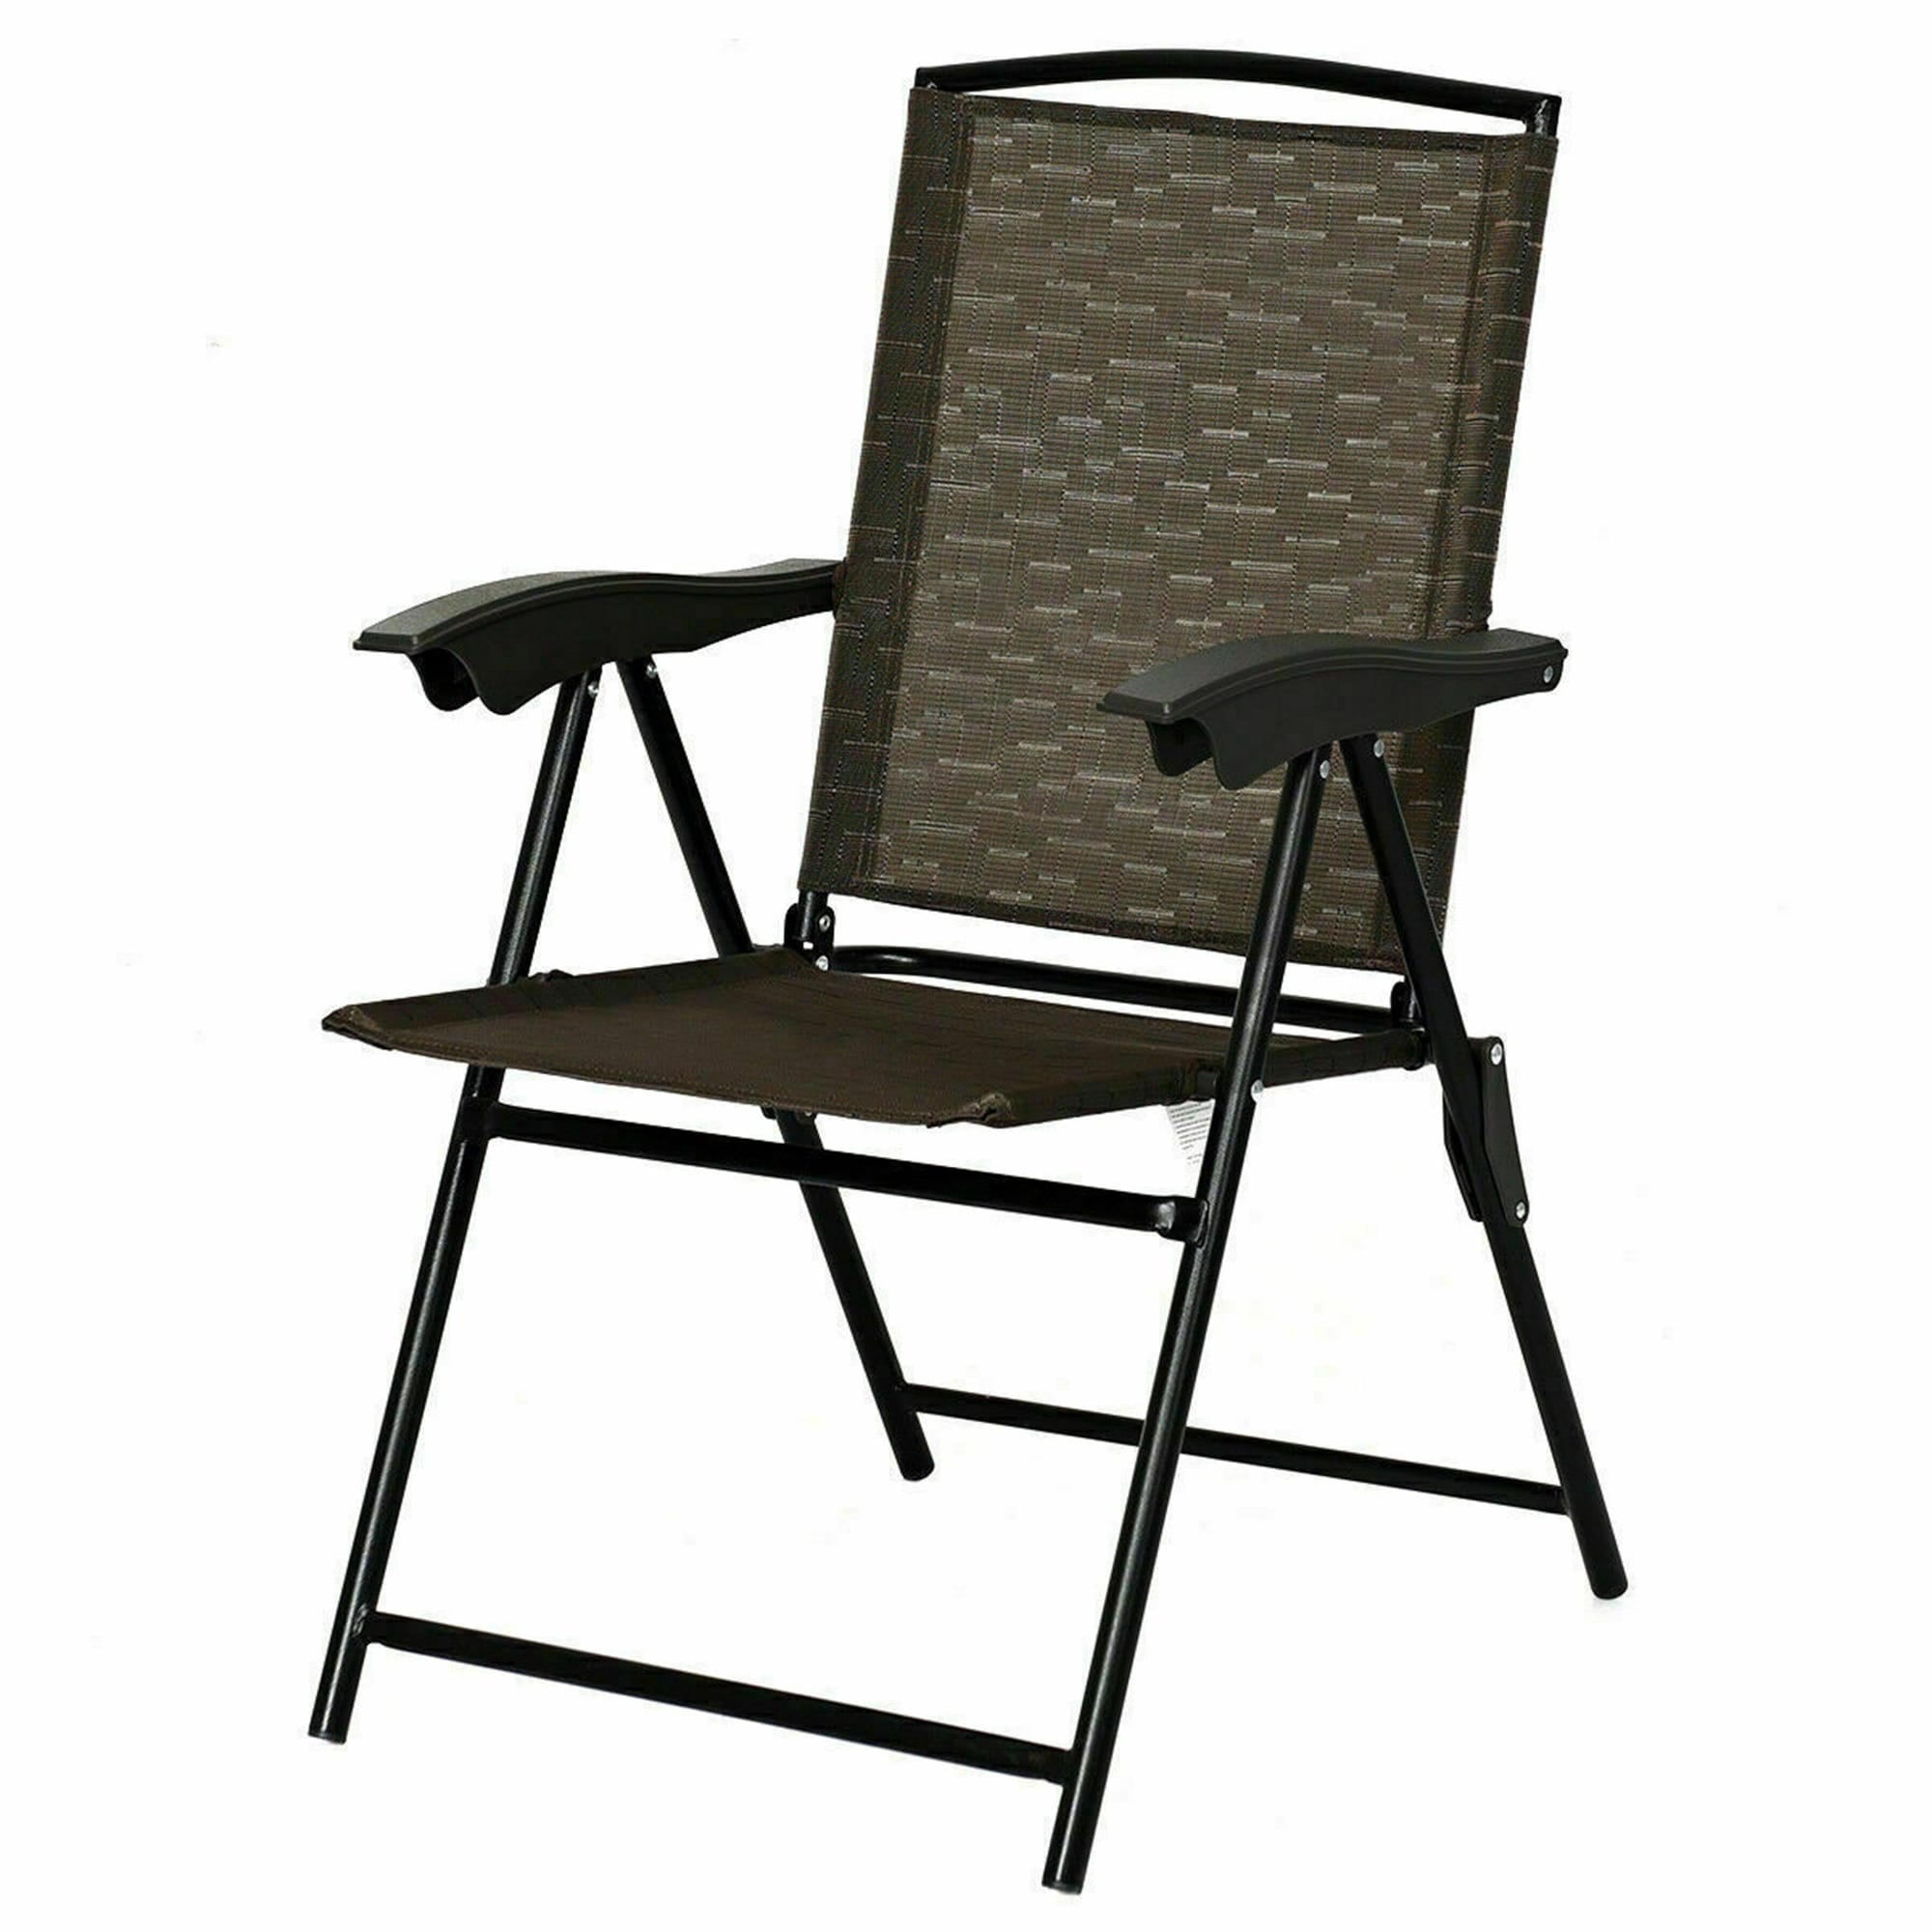 2pcs Folding Sling Chairs Set Portable Chairs With Adjustable Back